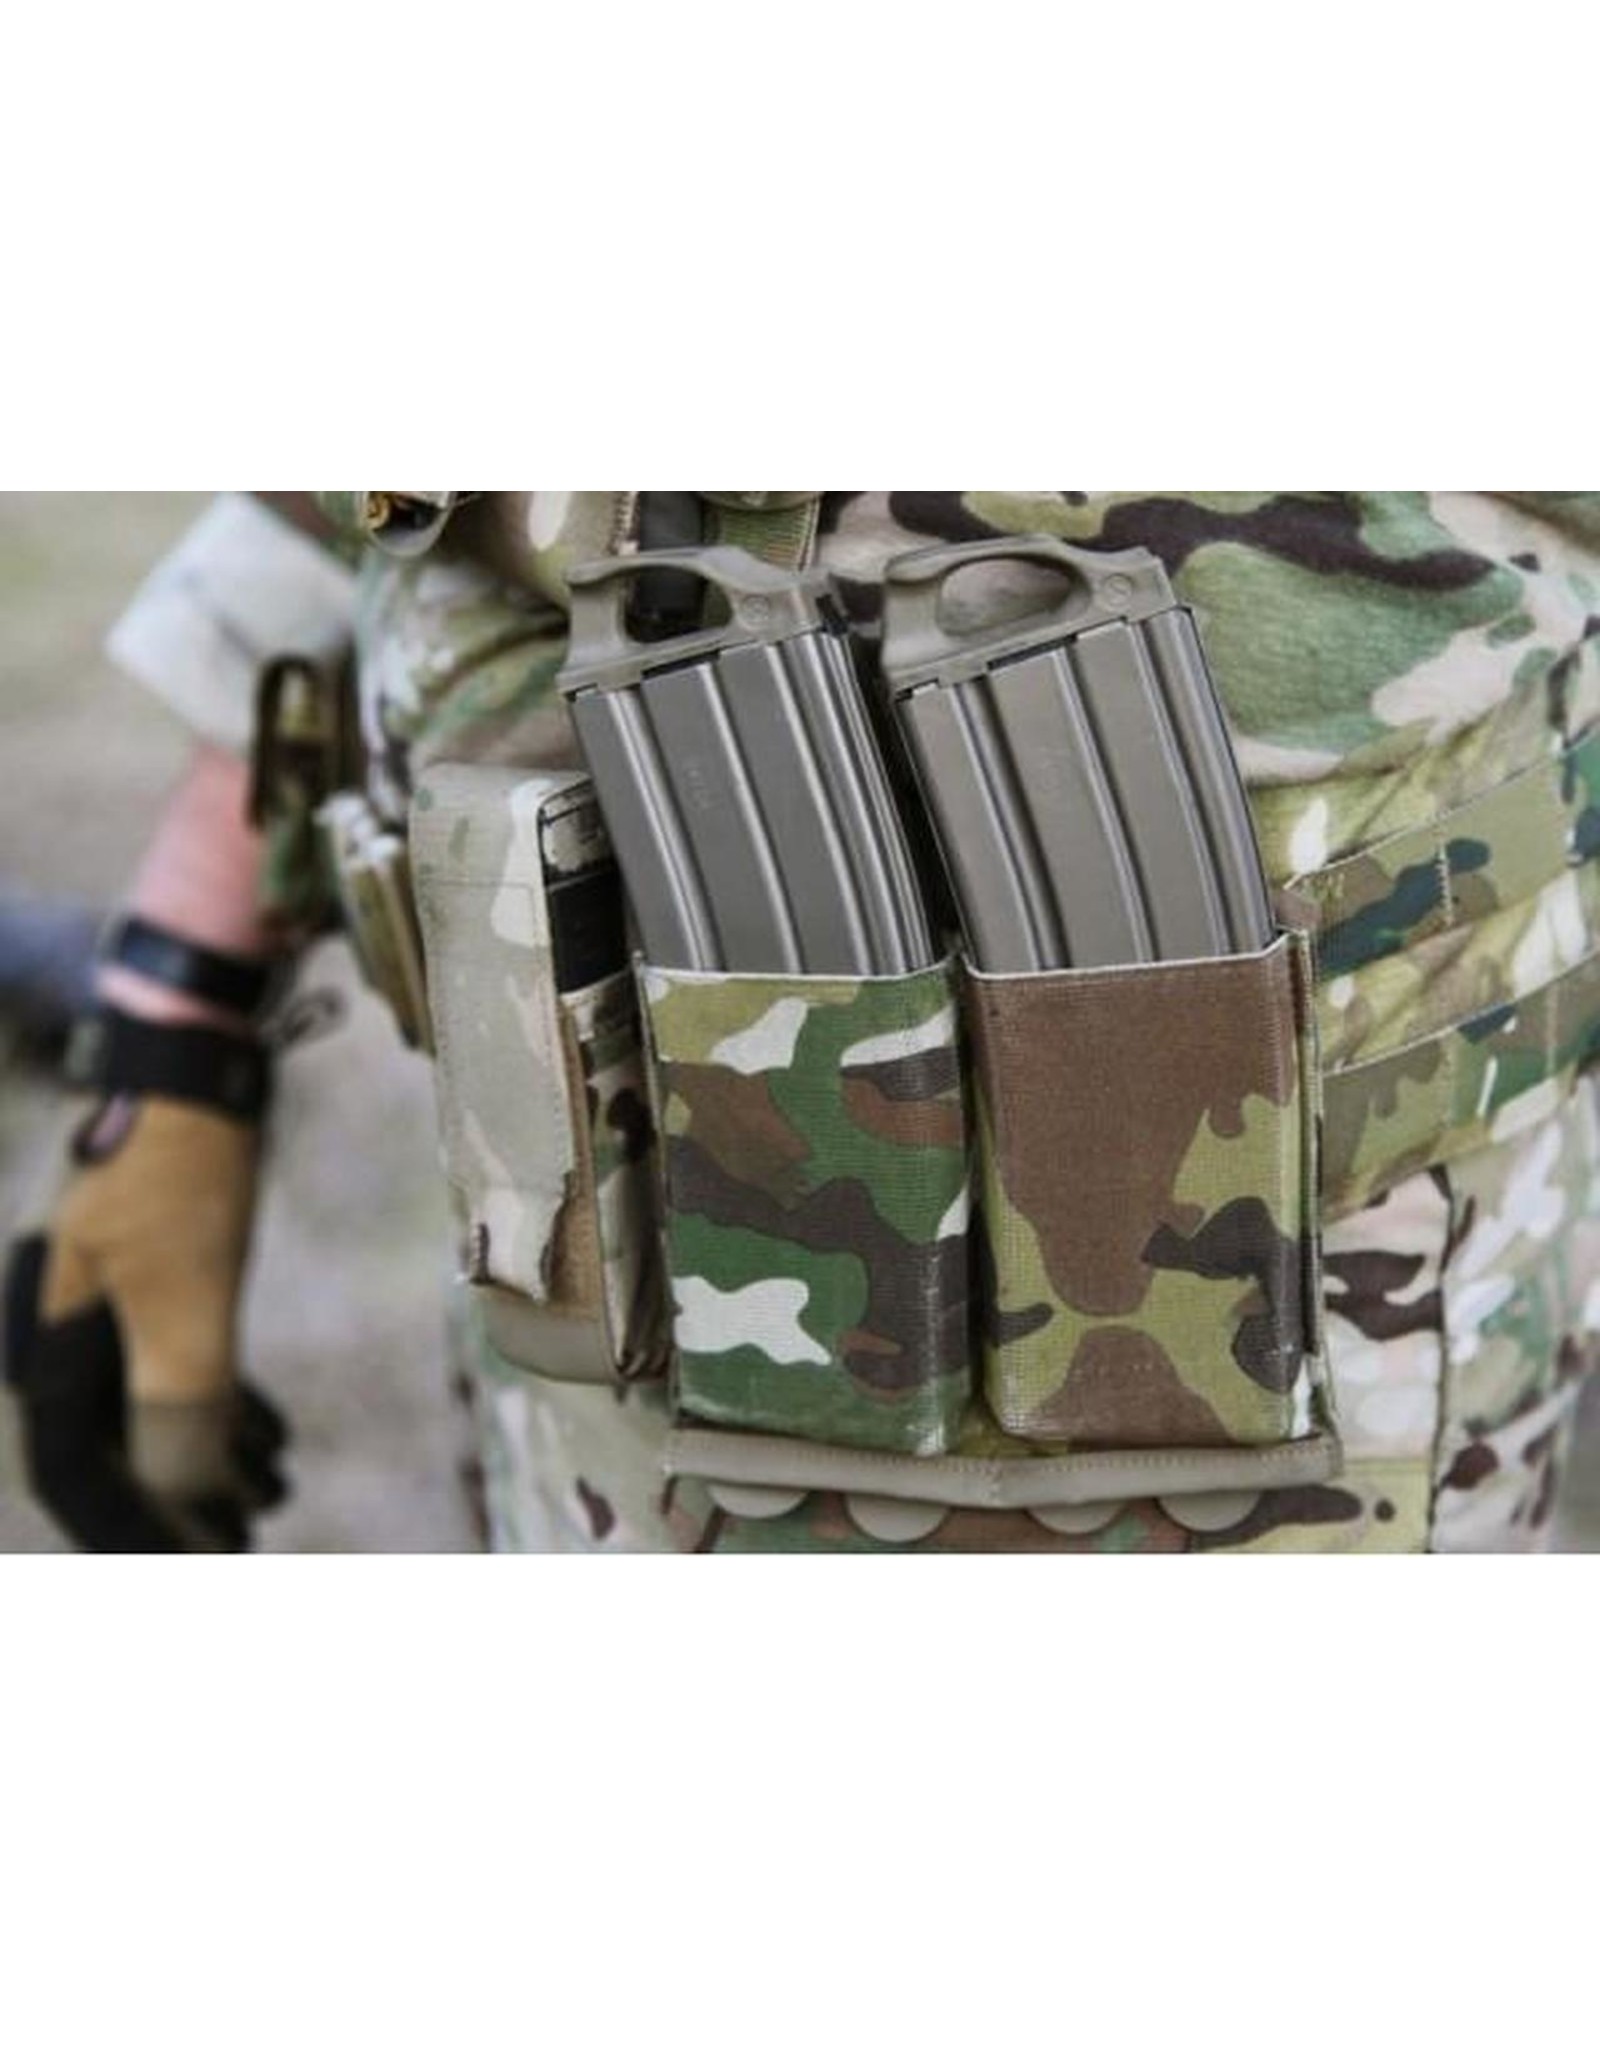 BLUE FORCE GEAR TEN-SPEED DOUBLE M4 MAG POUCH - SDTAC